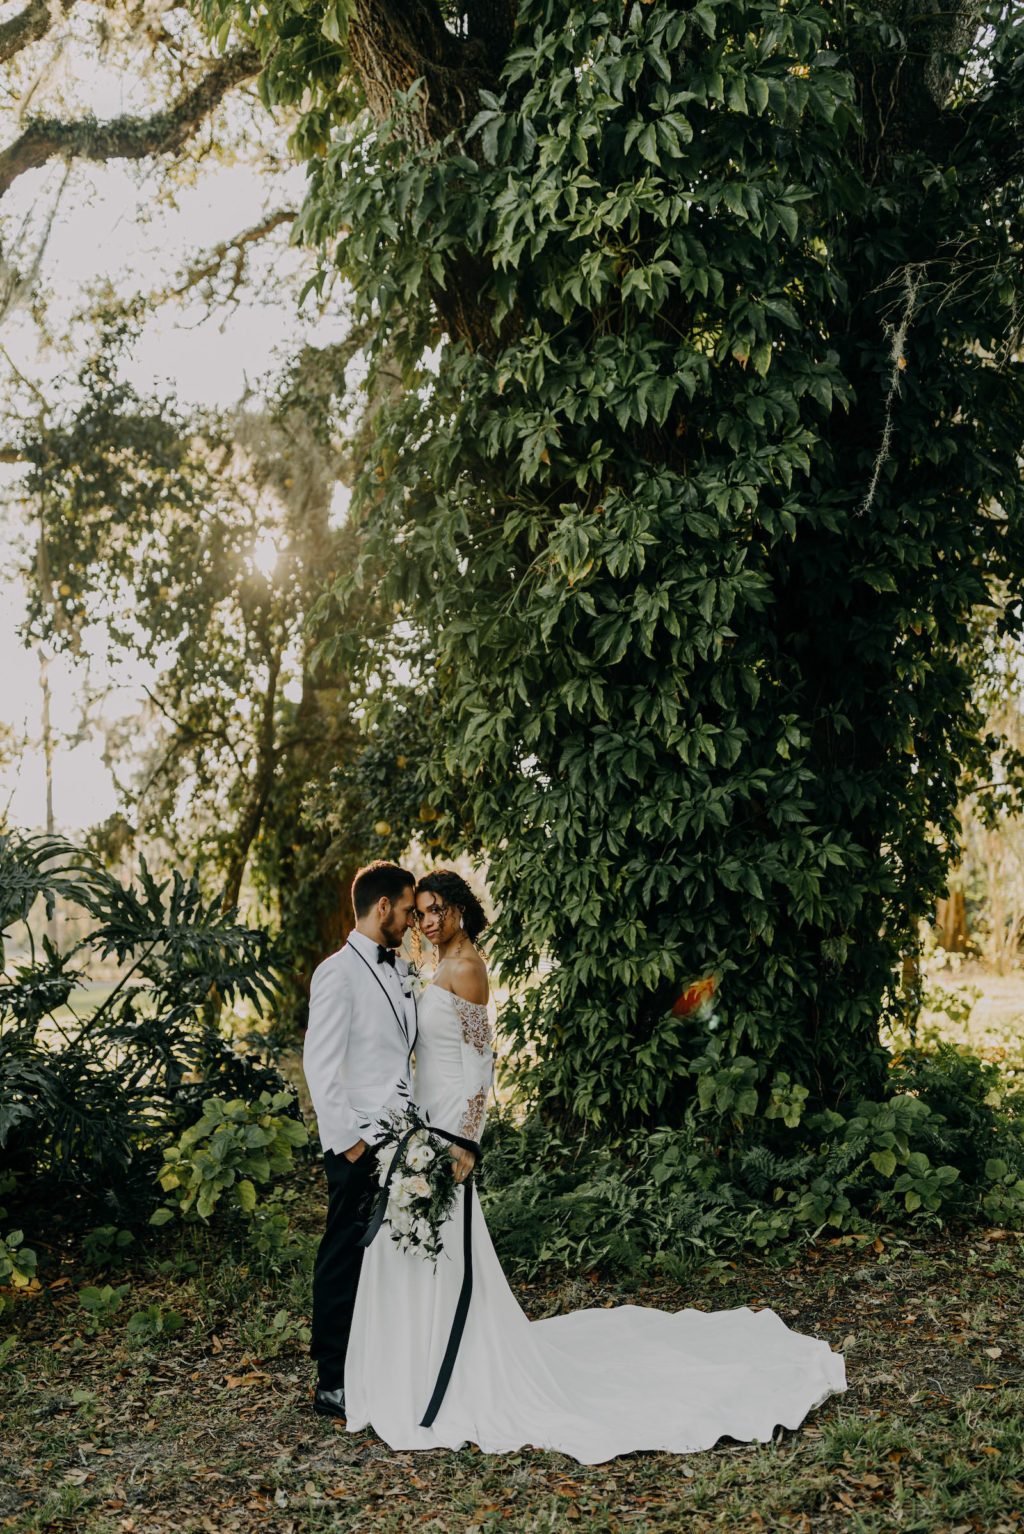 Outdoor Bride and Groom Portrait | Groom Wearing Classic Formal White Jacket with Black Lapel and Bow Tie | Off the Shoulder Lace Sleeve Sheath Wedding Gown Bridal Dress | Amber McWhorter Photography